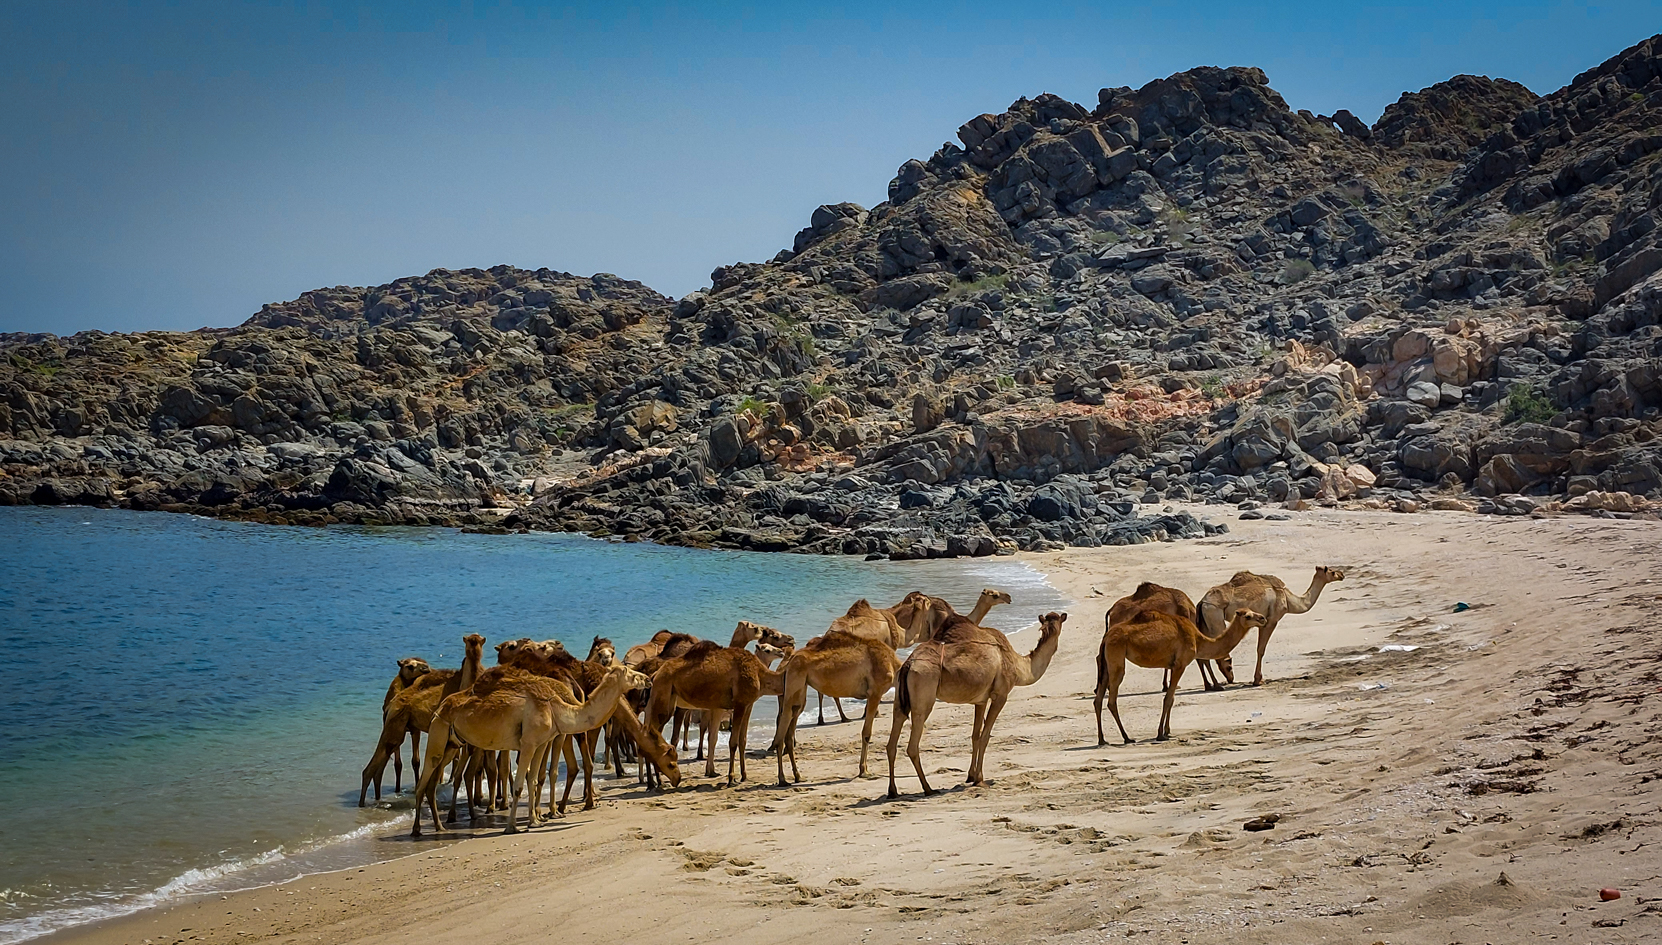 <span  class="uc_style_uc_tiles_grid_image_elementor_uc_items_attribute_title" style="color:#ffffff;">beach camels ;-)</span>